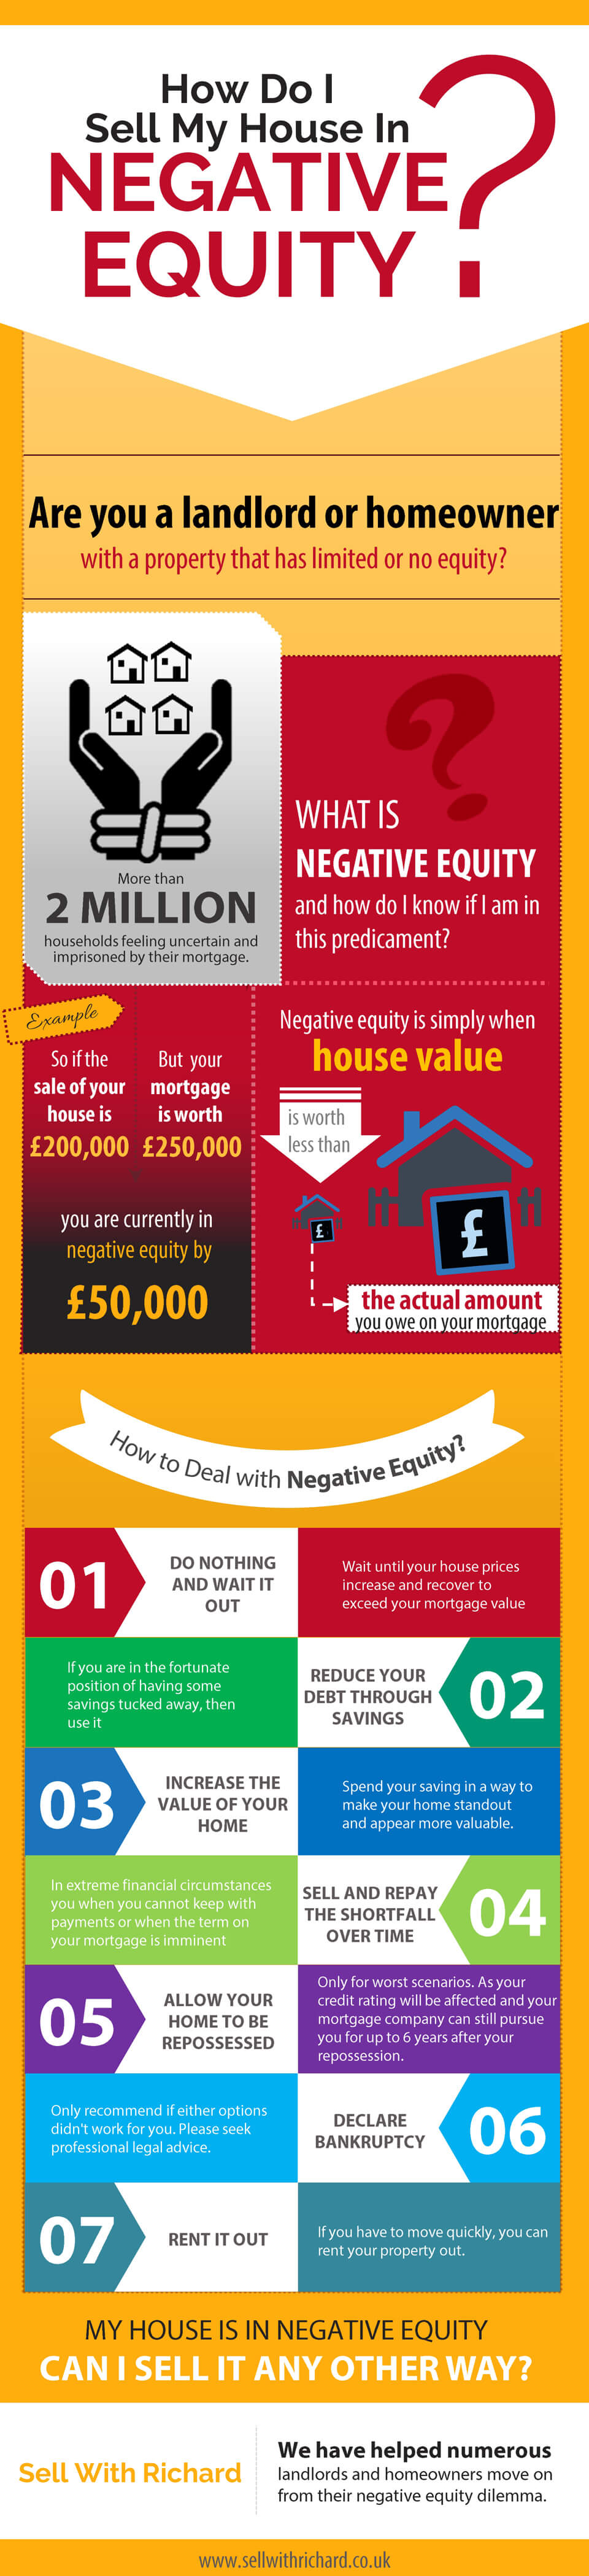 How-Do-I-Sell-My-House-In-Negative-Equity-infographic-plaza